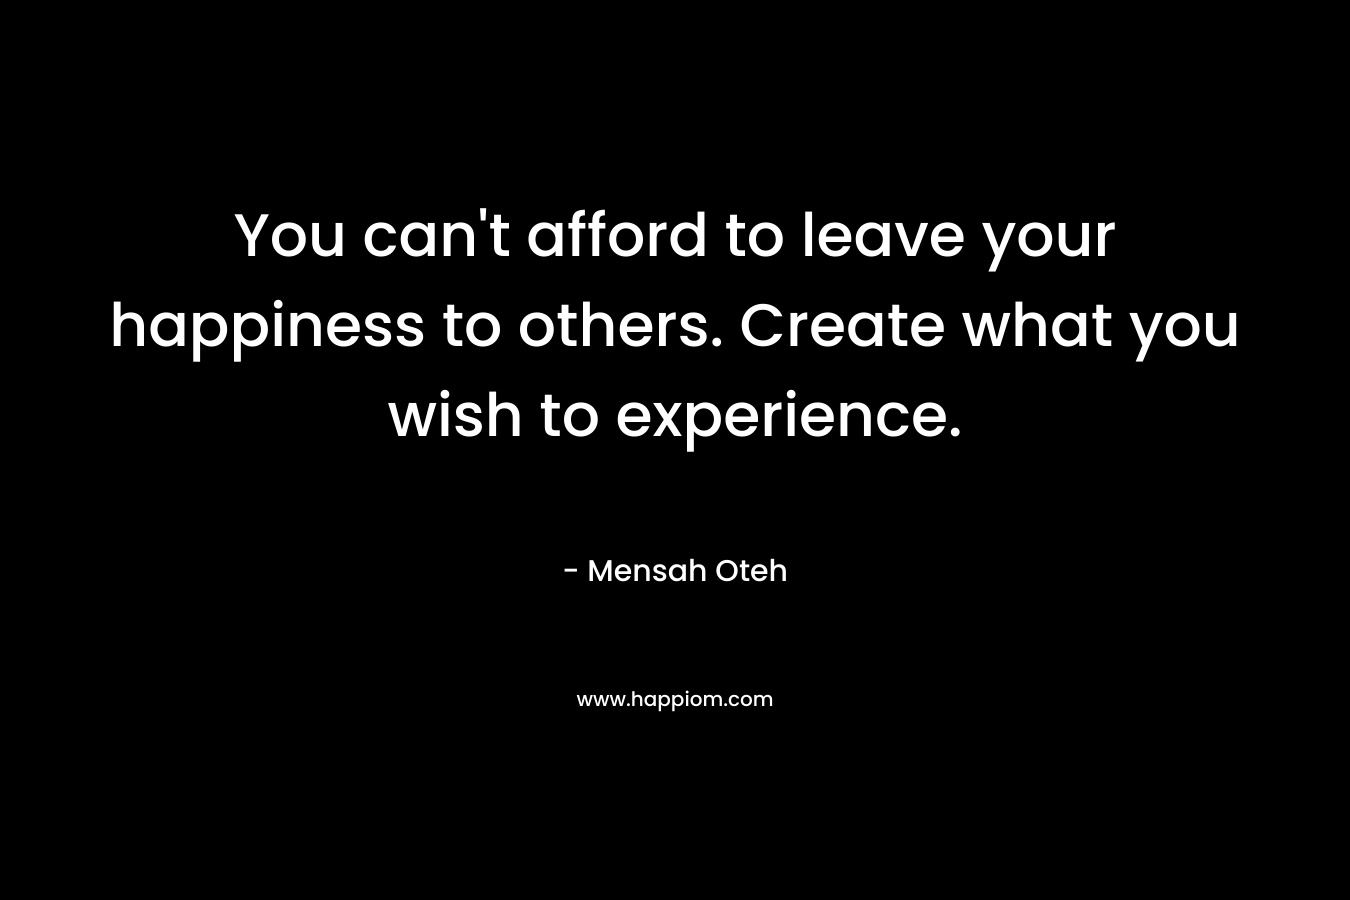 You can't afford to leave your happiness to others. Create what you wish to experience.